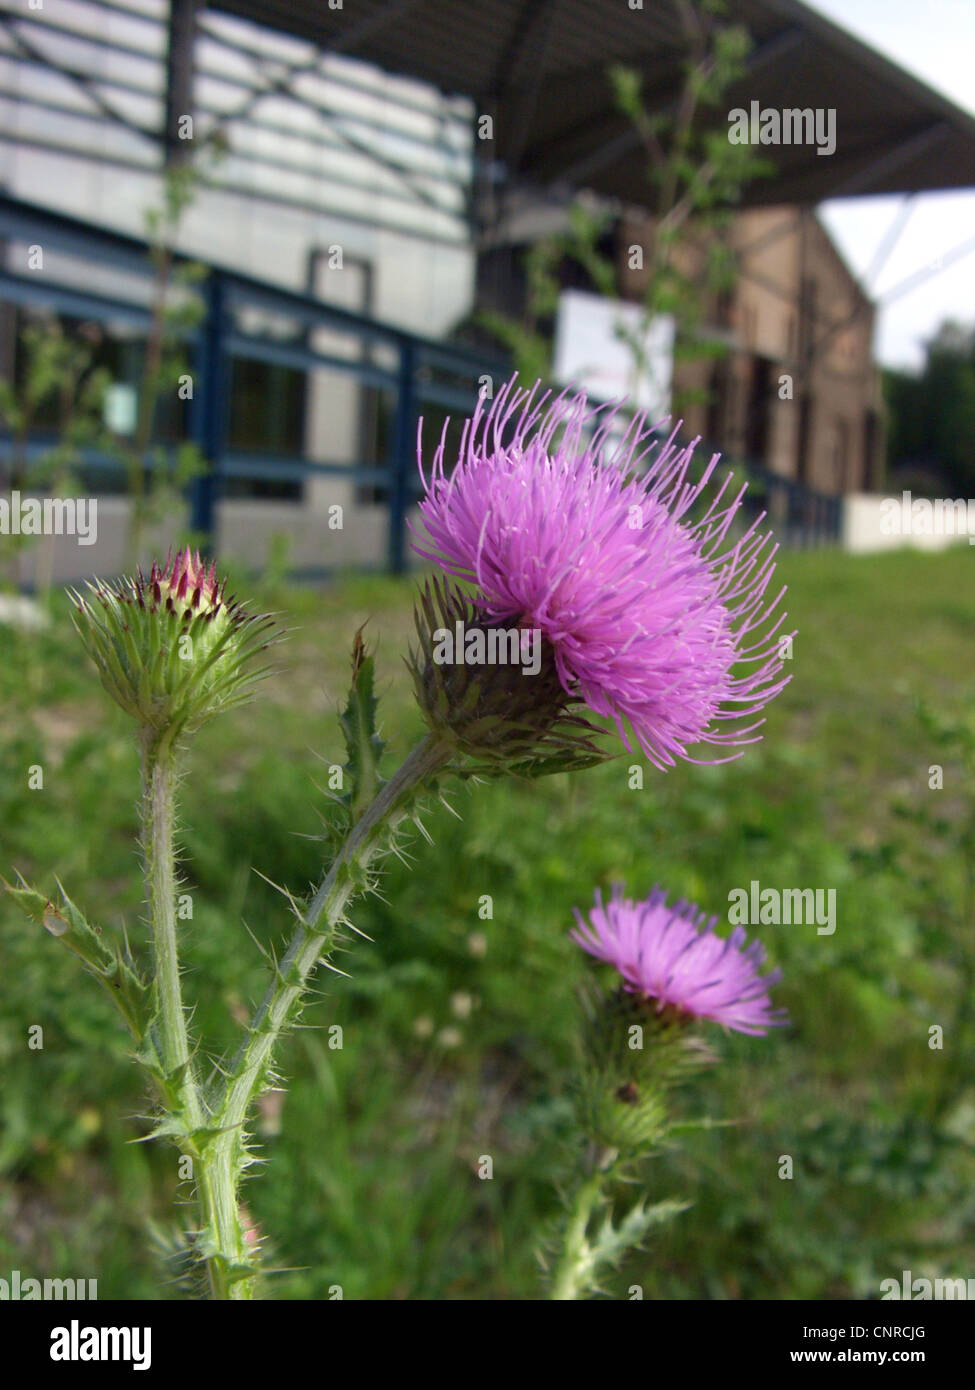 acanthus thistle, plumeless thistle, curled thistle (Carduus acanthoides), blooming, Germany, North Rhine-Westphalia, Ruhr Area, Bochum Stock Photo